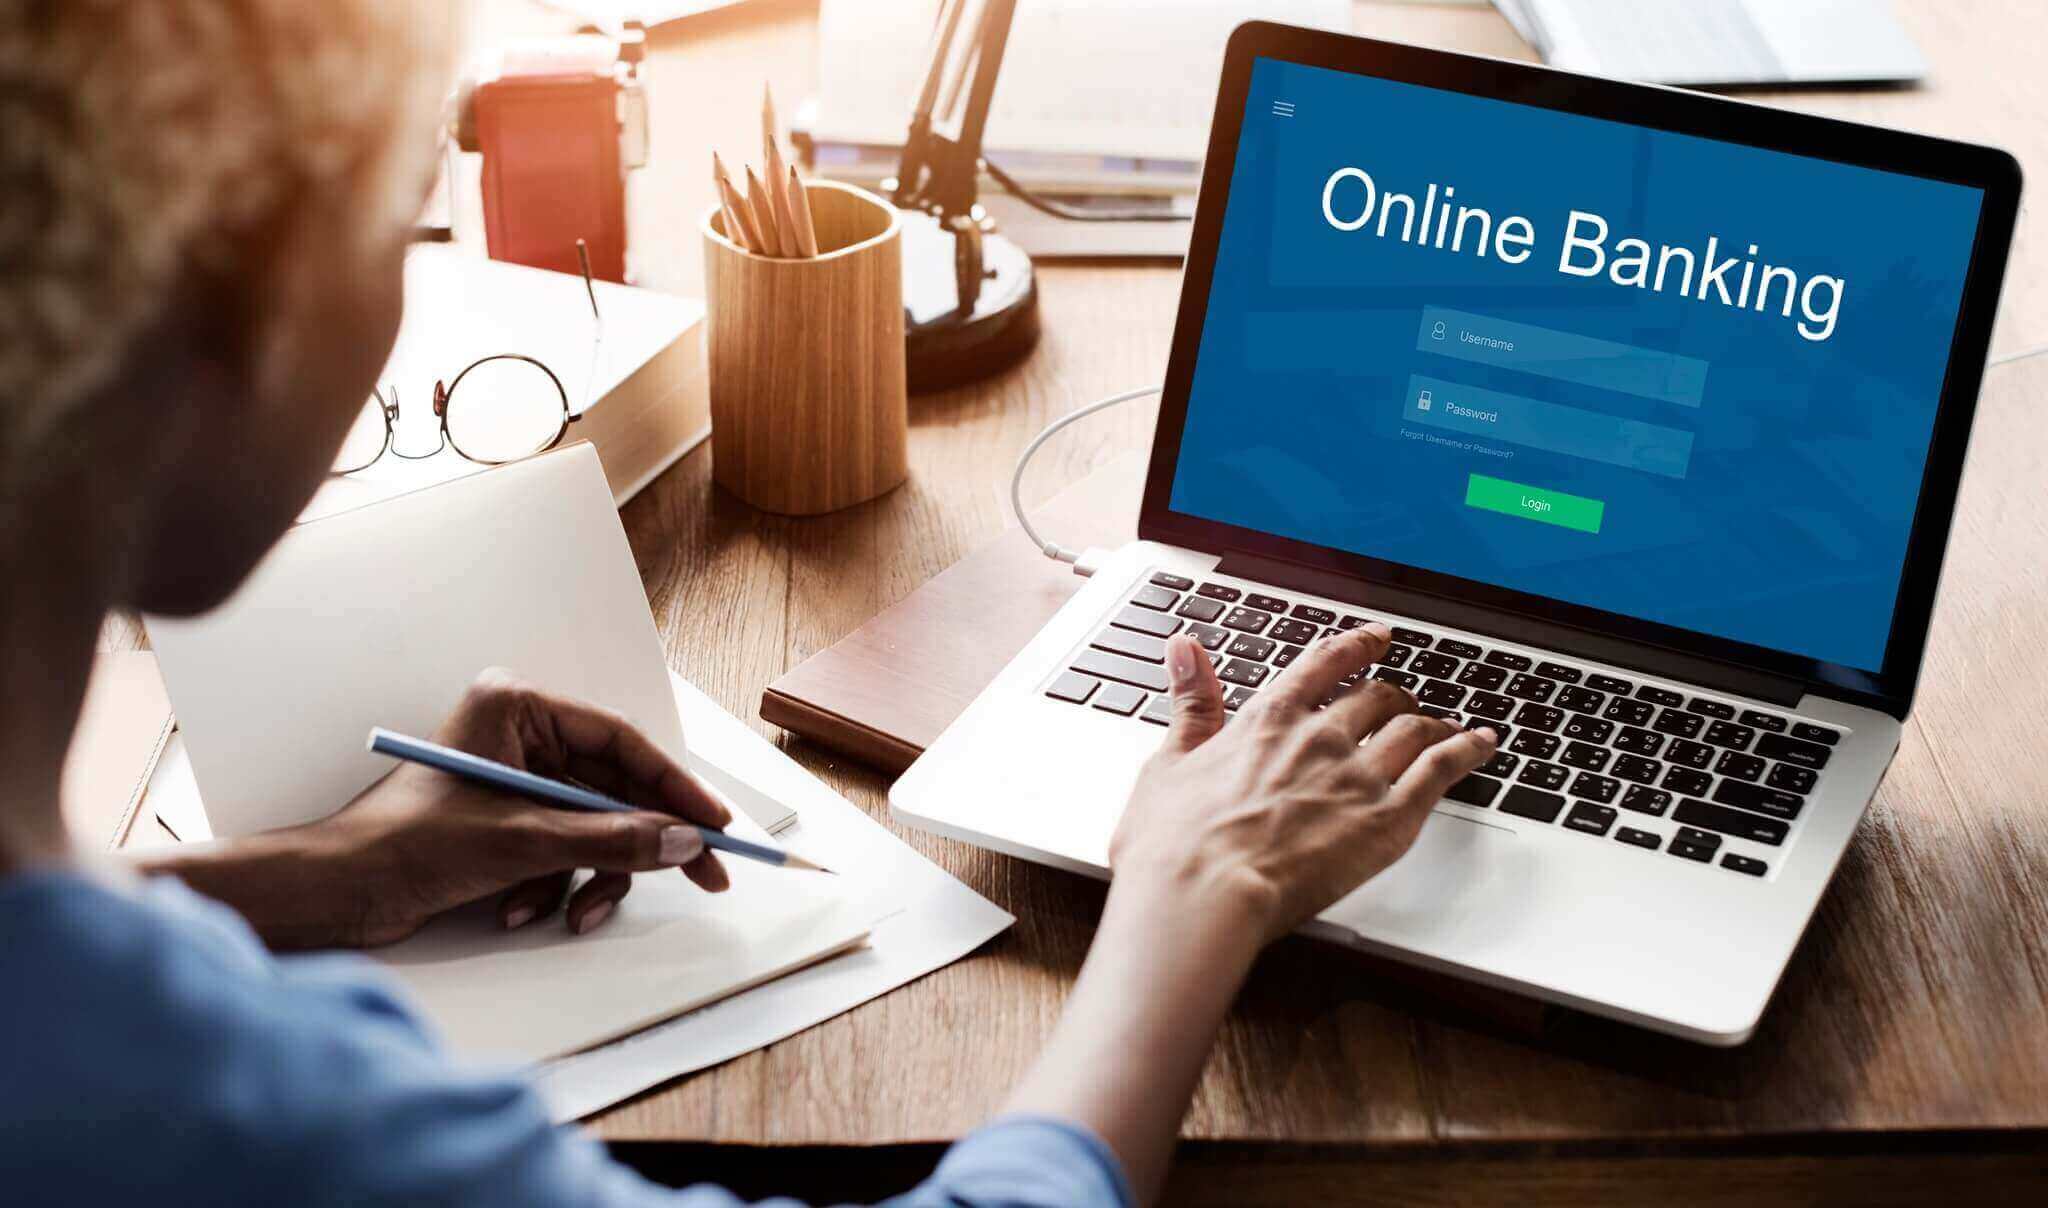 online payment internet banking concept